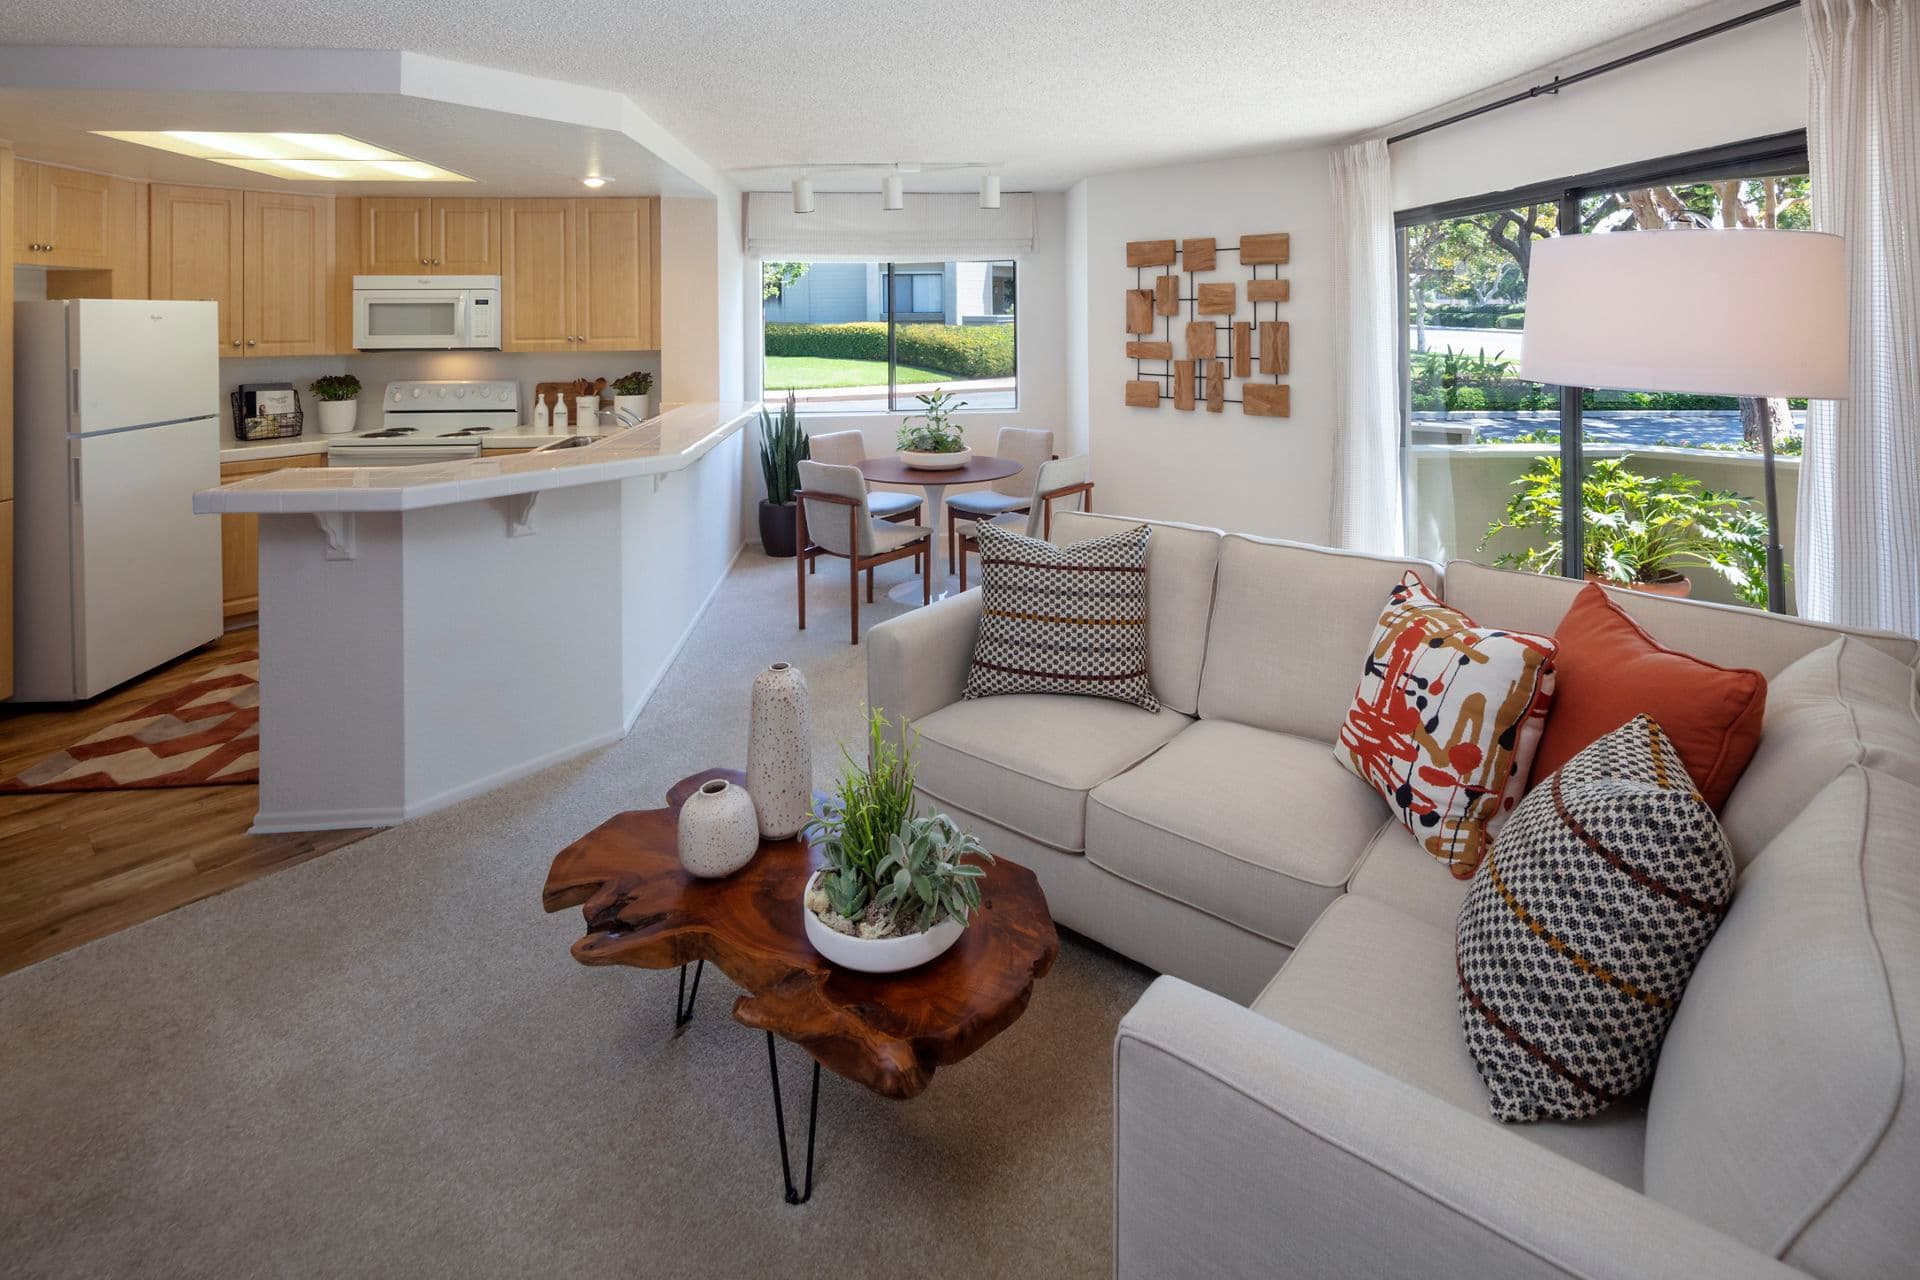 Interior view of living room, dining room and kitchen at Cross Creek Apartment Homes in Irvine, CA.